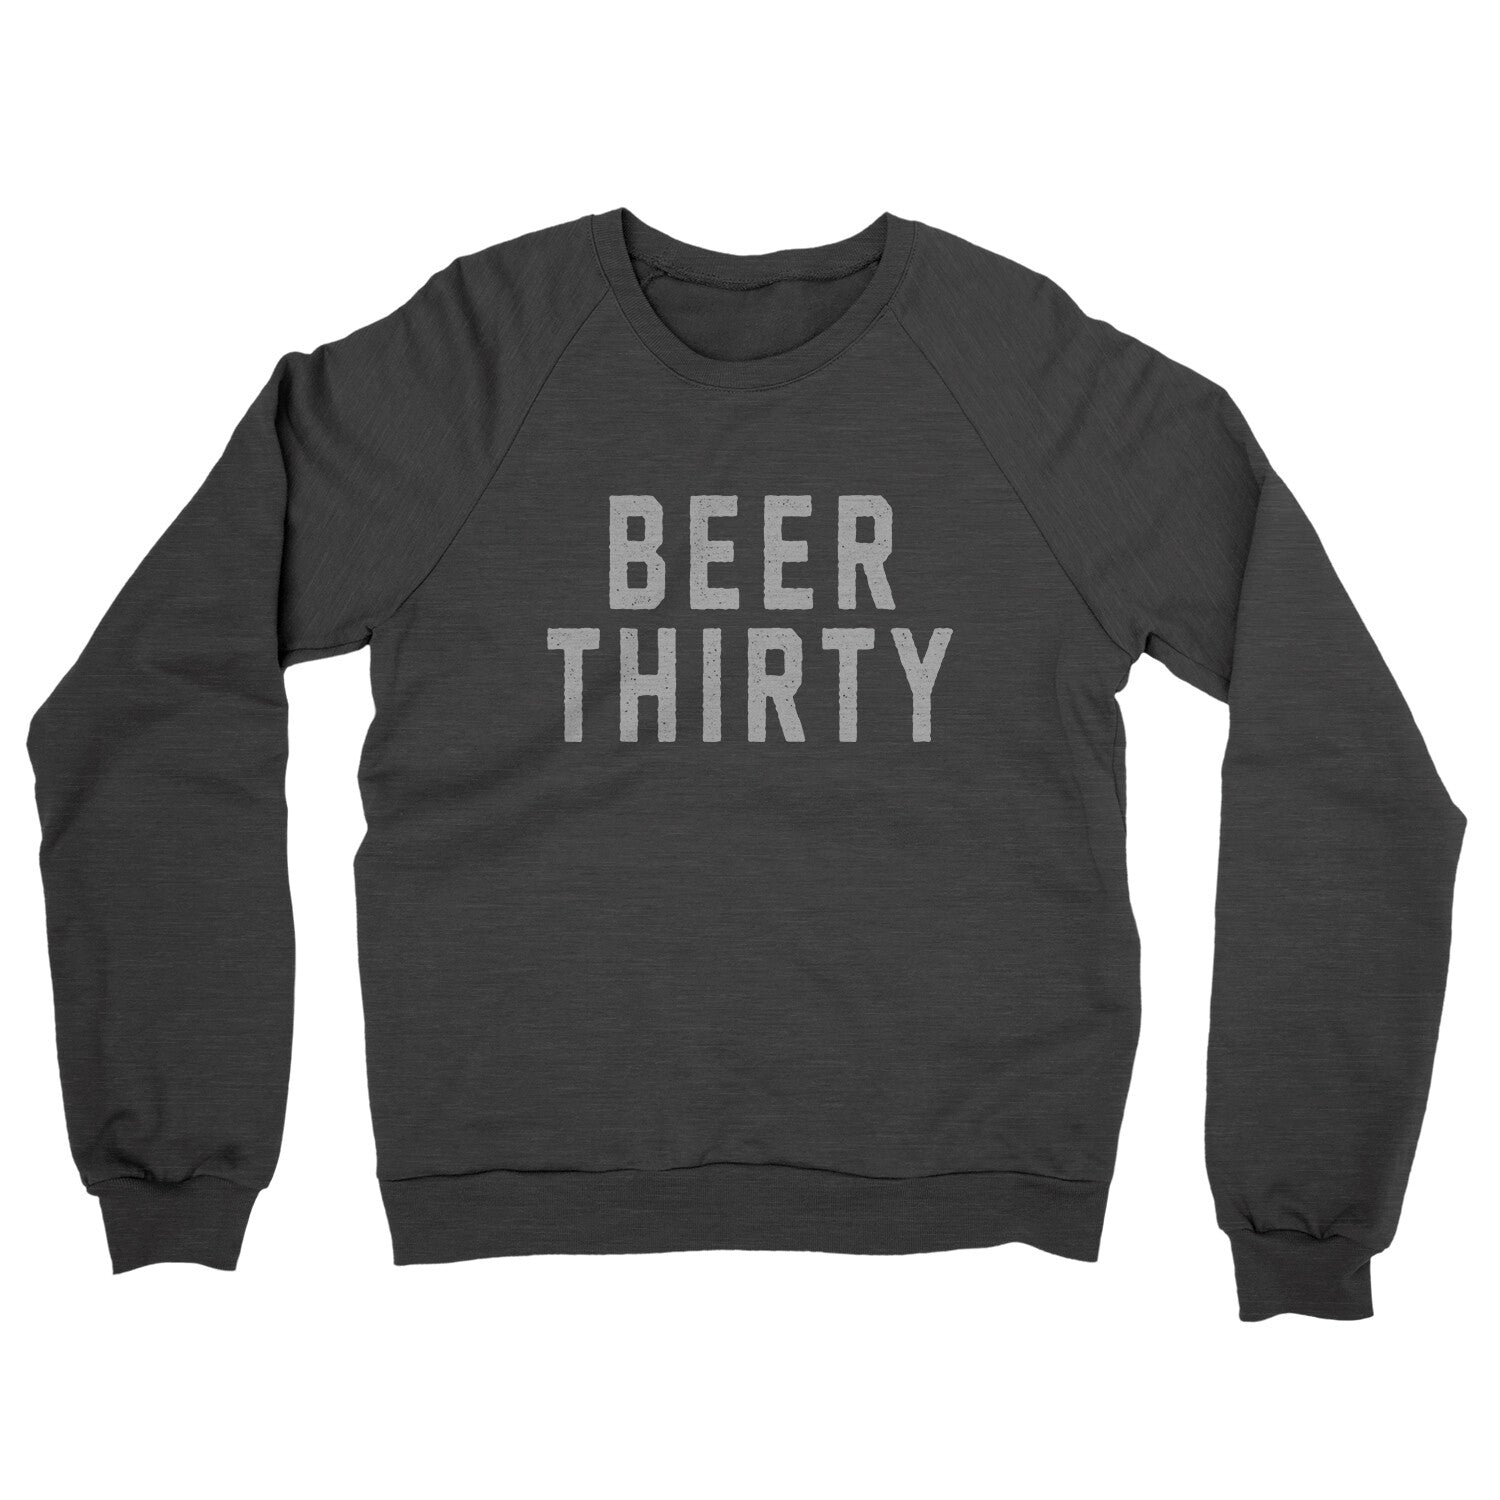 Beer Thirty in Charcoal Heather Color